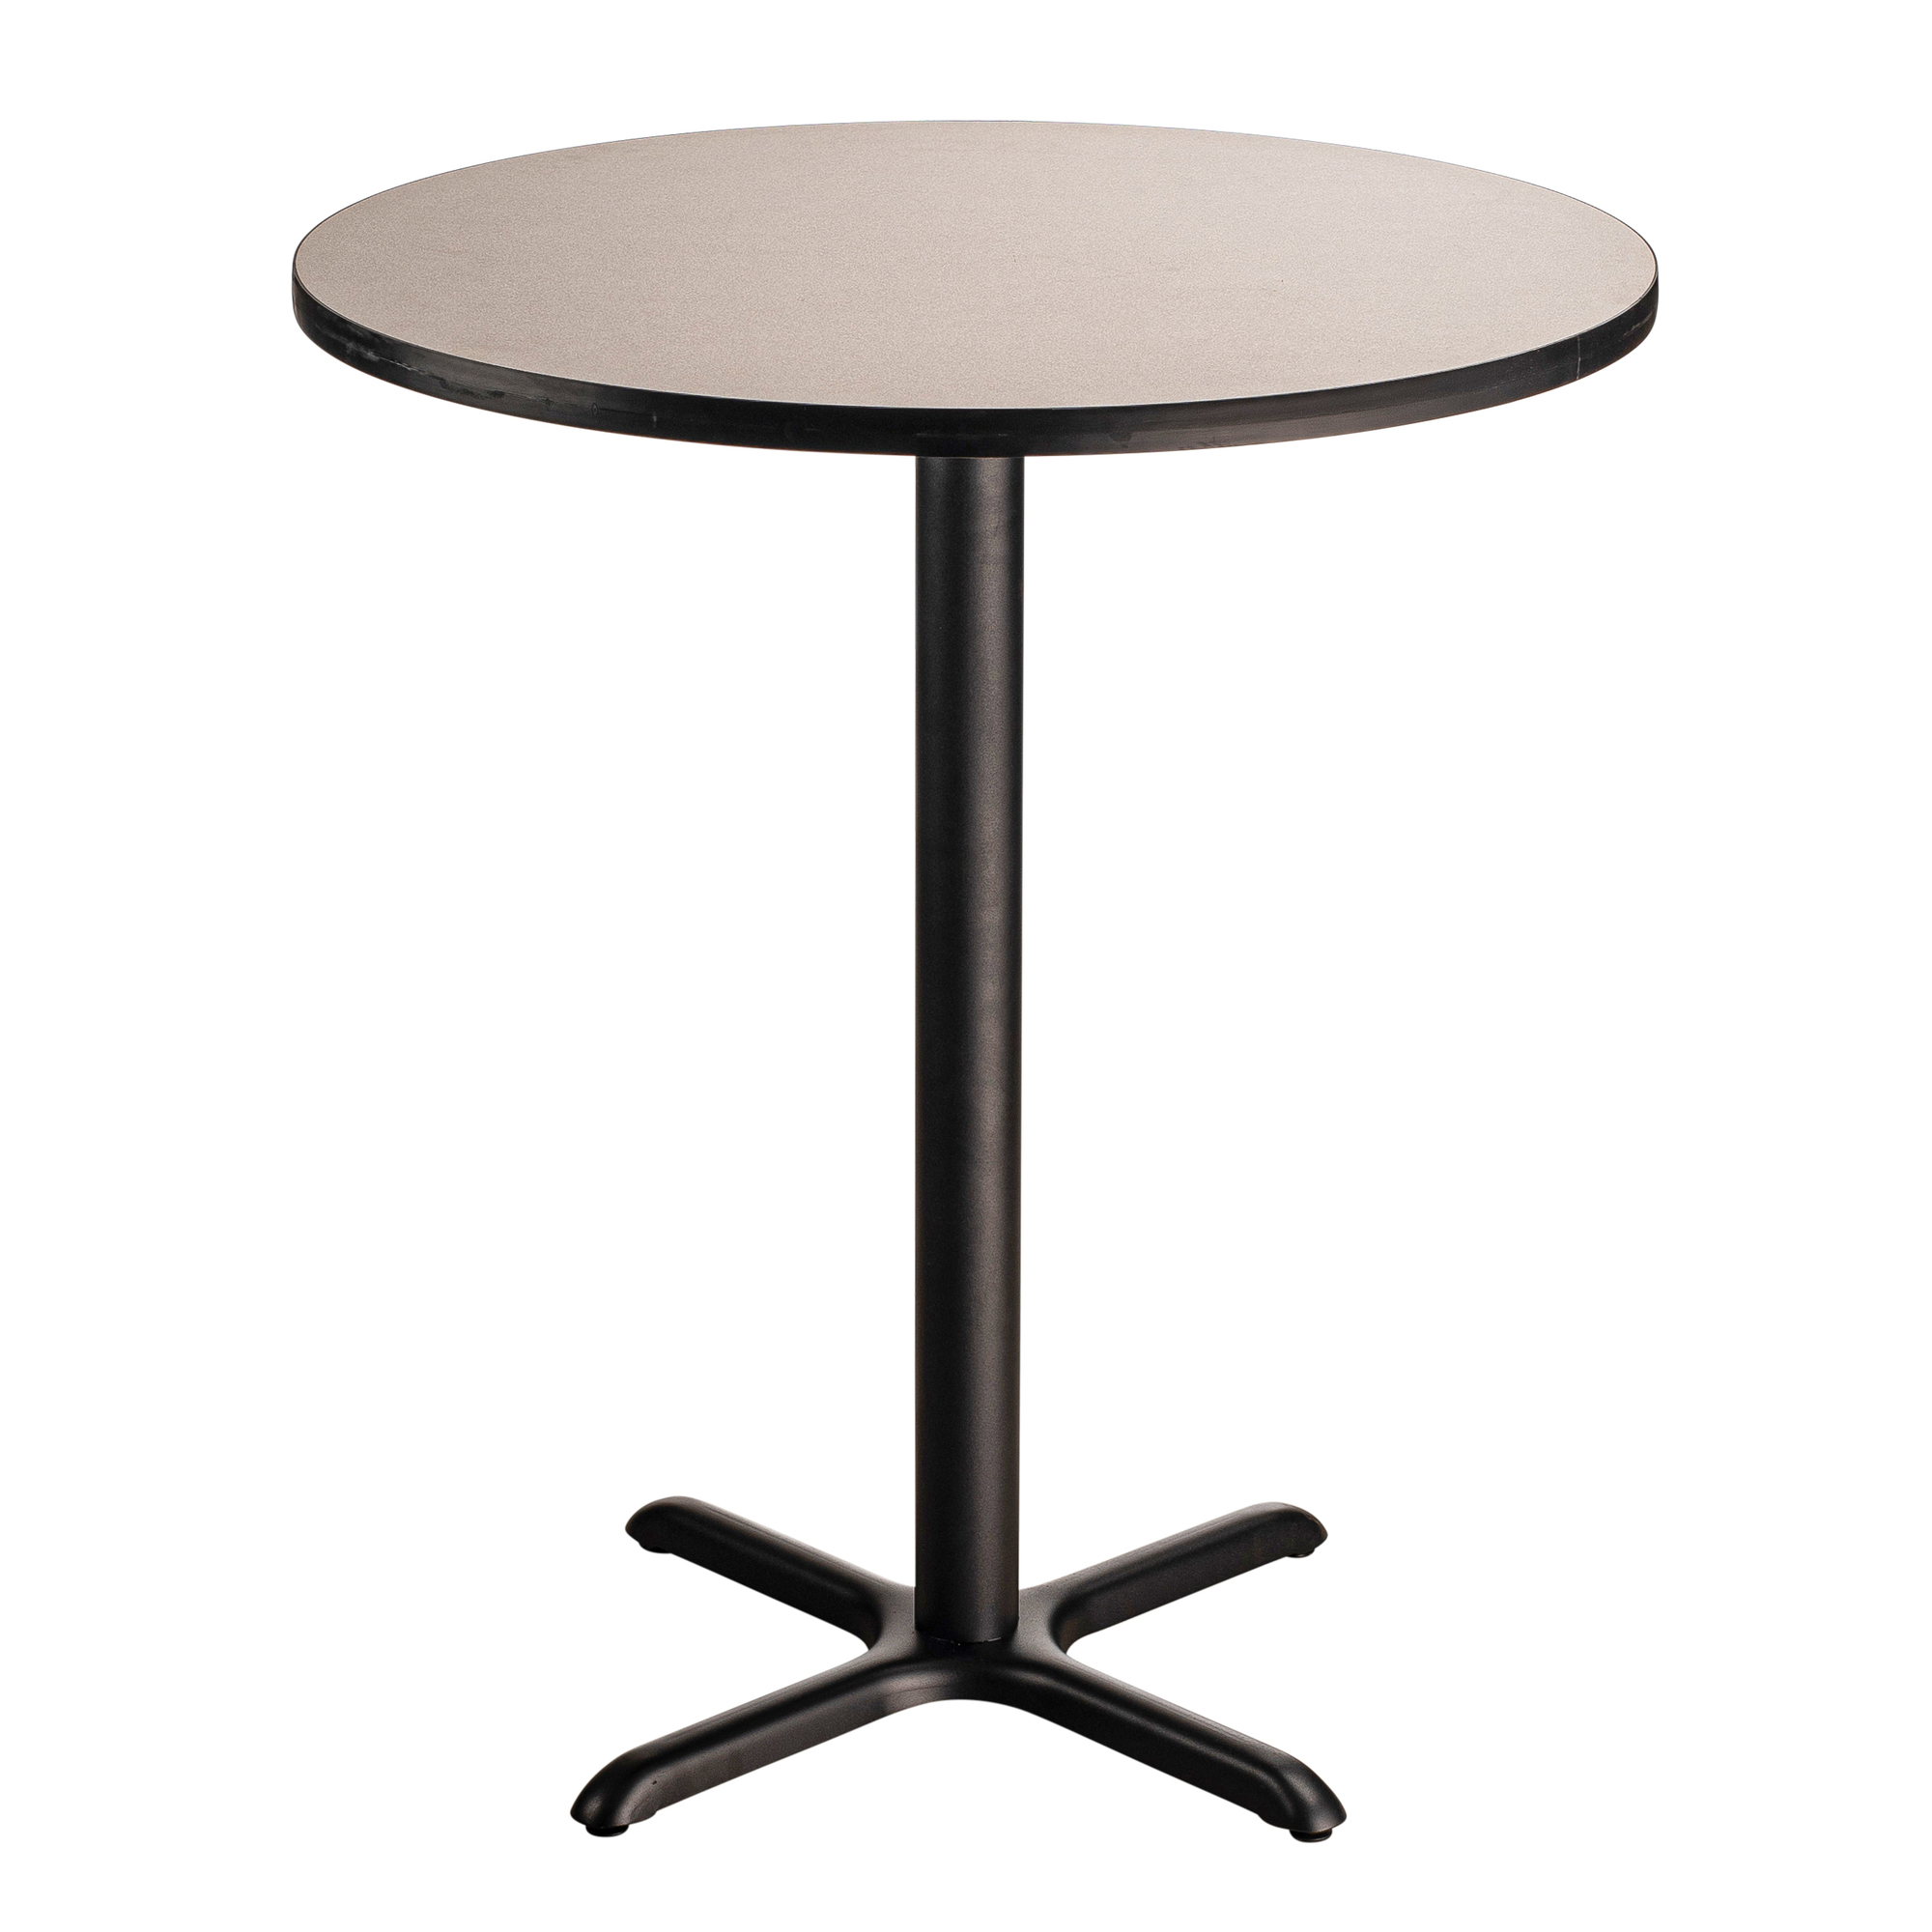 "National Public Seating, Cafe Table, 36x36x42 Round ""X"" Base, Height 42 in, Model CT13636XBPBTMGY"